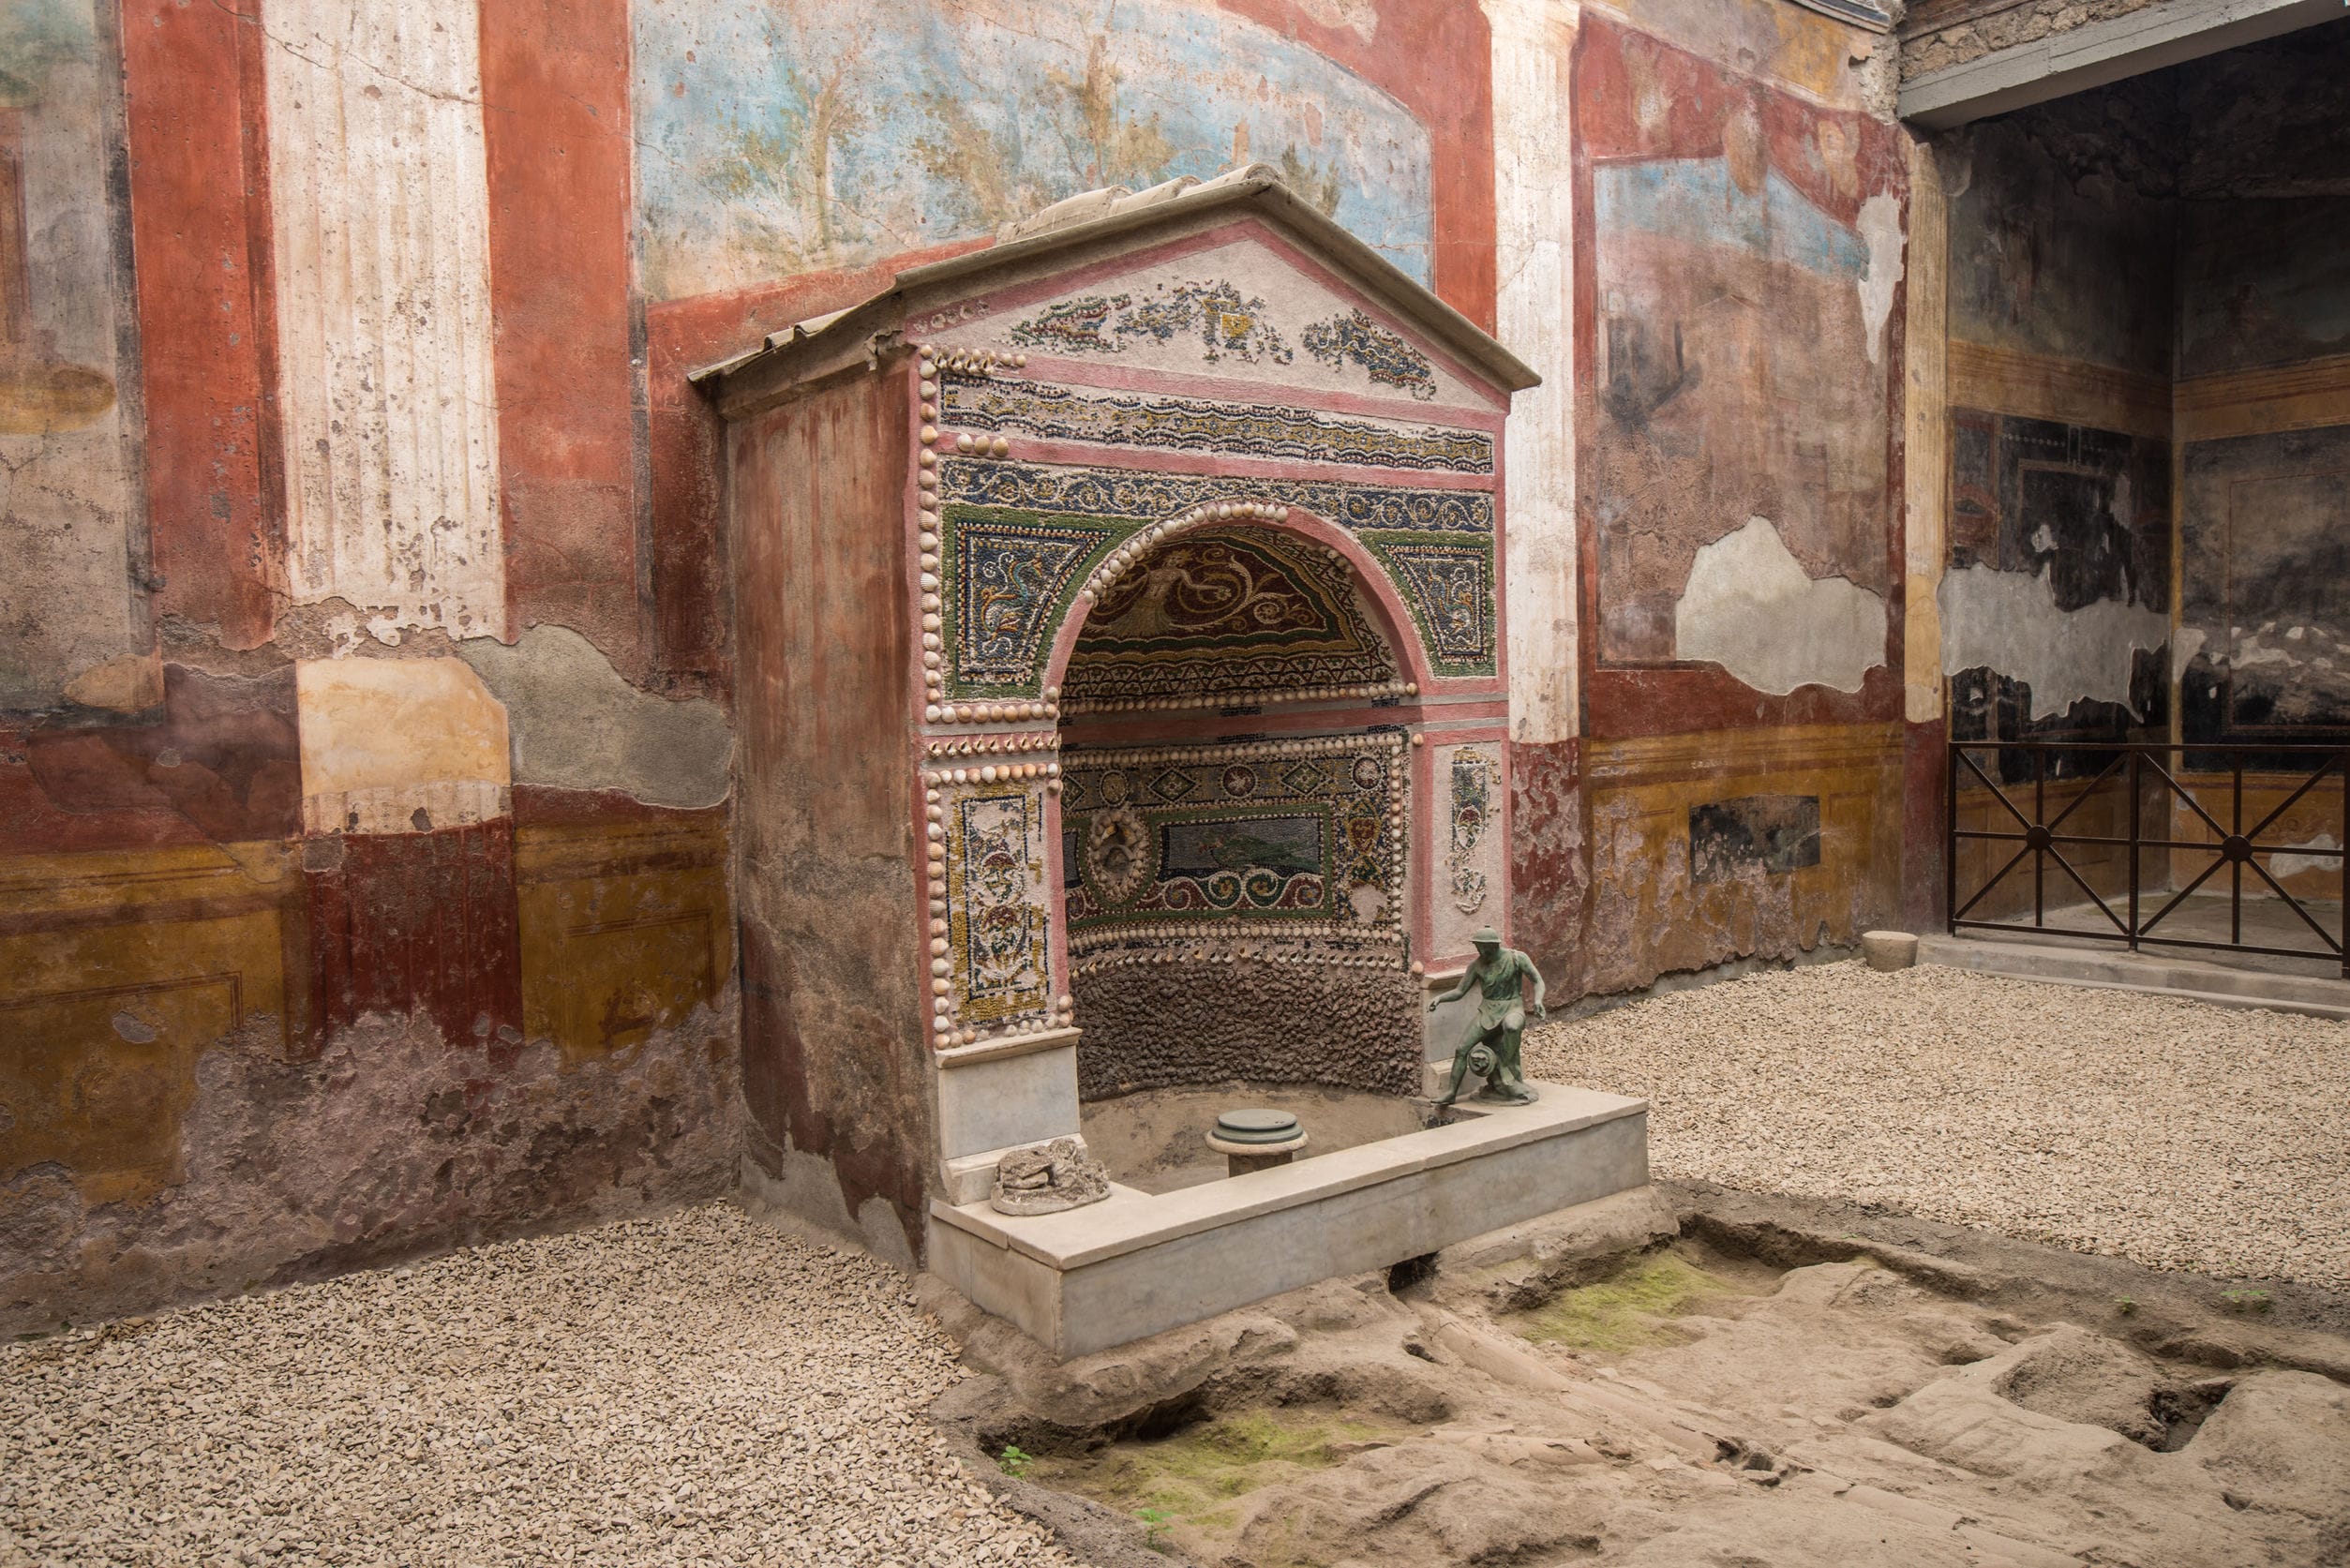 House of the Small Fountain